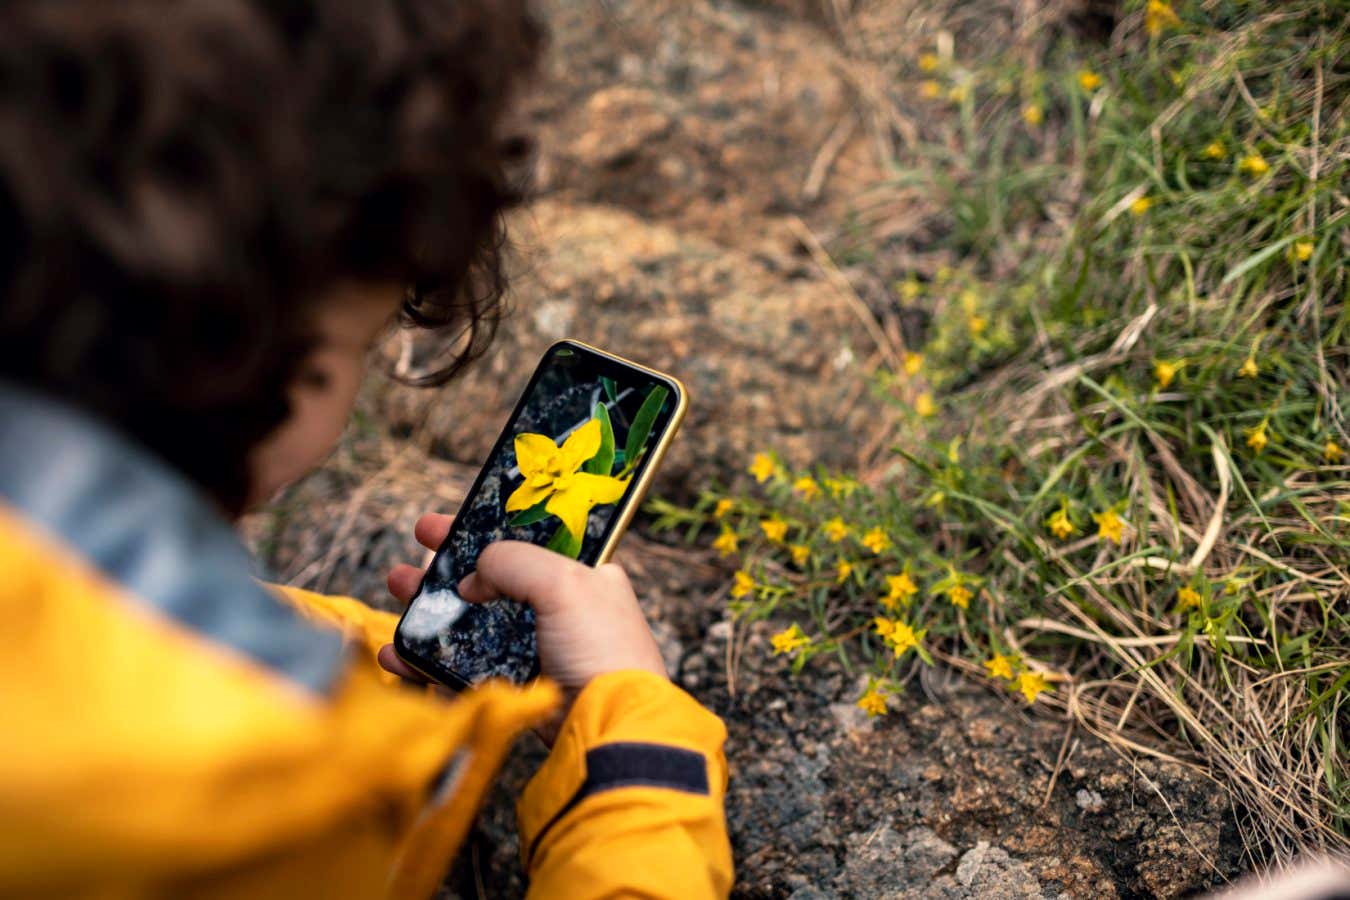 Boy using smartphone to photograph a plant